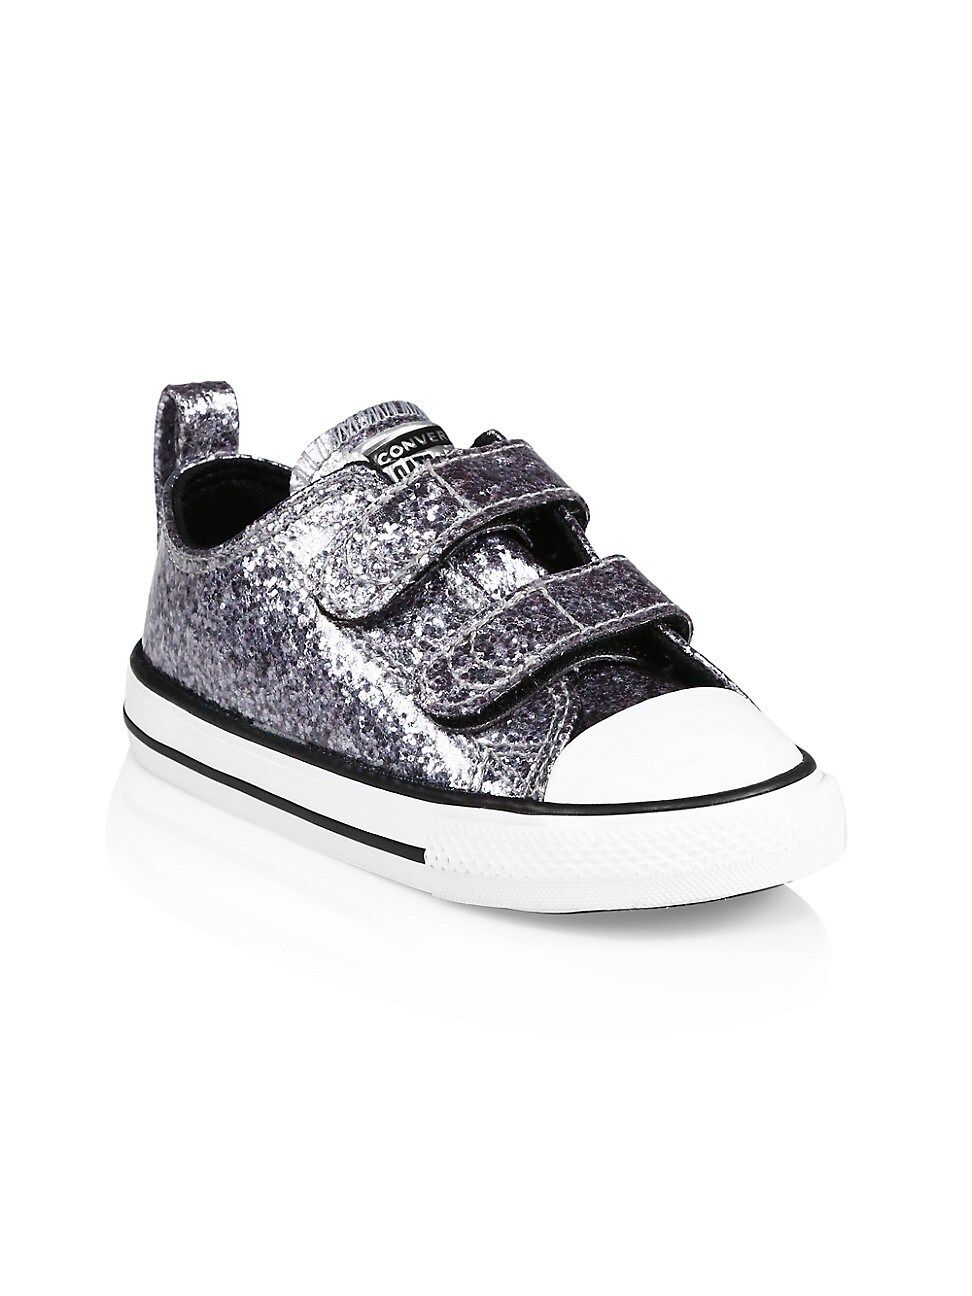 Converse Baby's & Little Girl's Glitter Grip-Tape Low-Top Sneakers - Black - Size 2 (Baby) | Saks Fifth Avenue